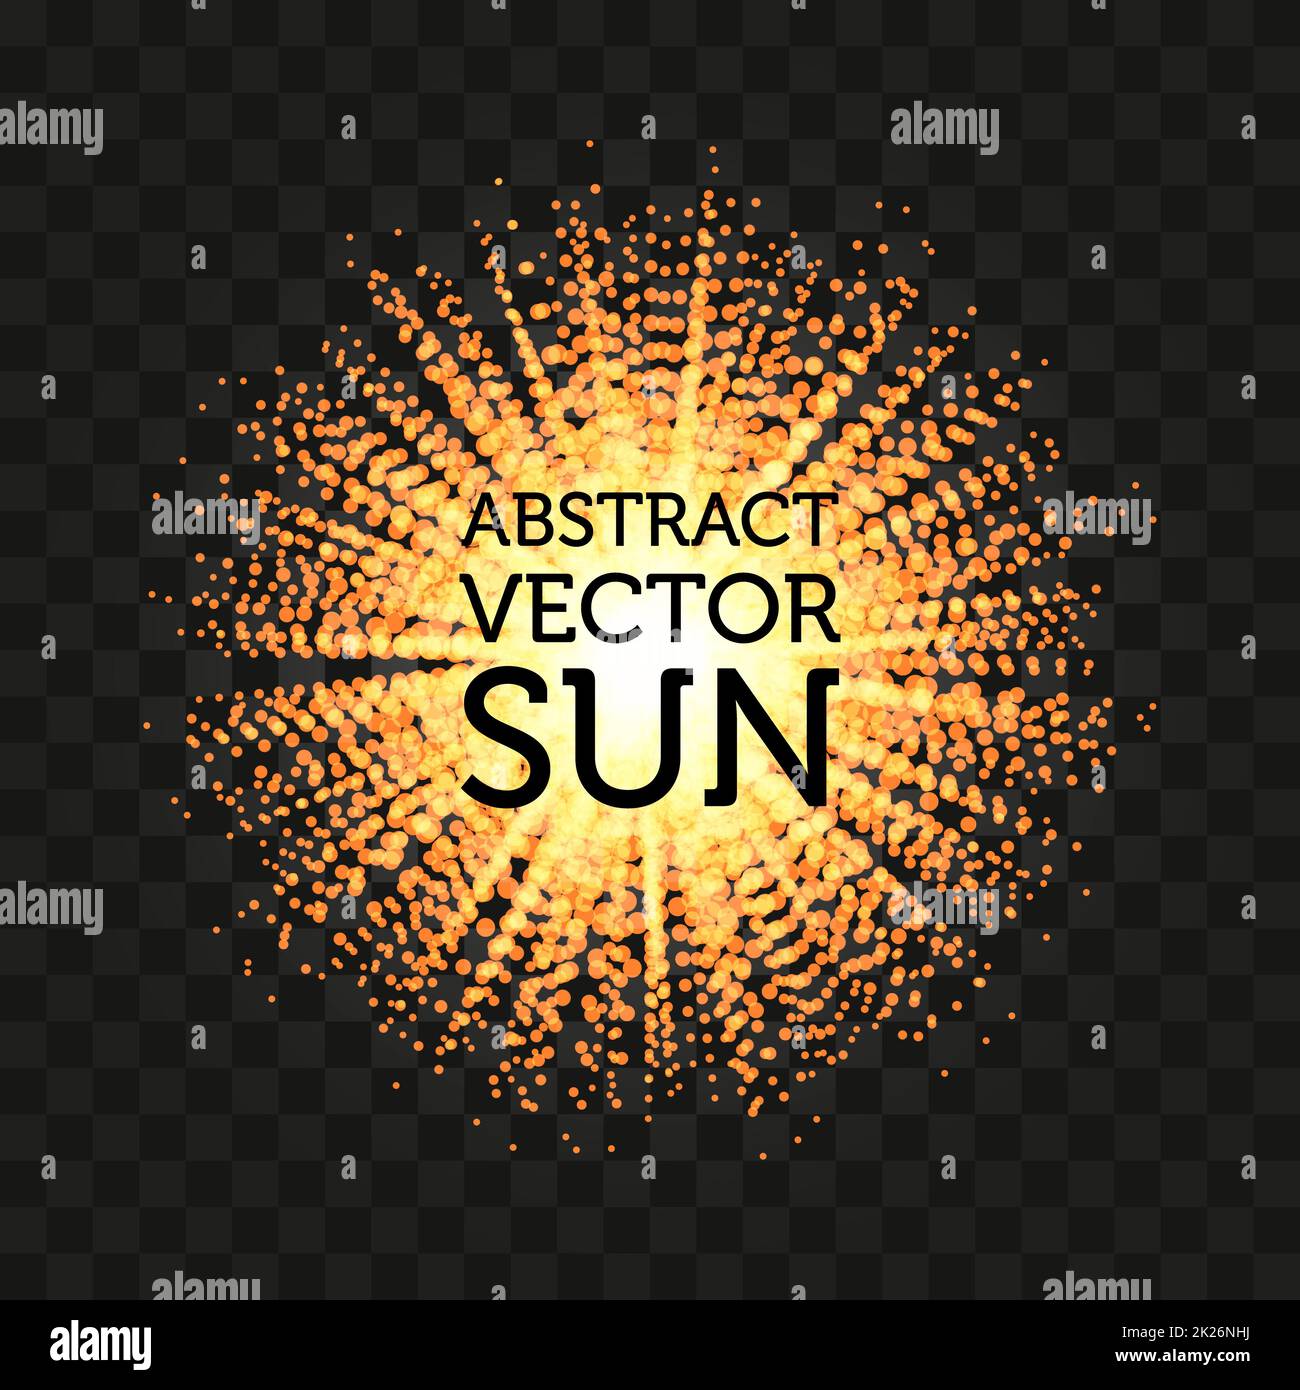 Isolated abstract round shape shining sun vector background. Sunbeams backdrop. Stock Photo